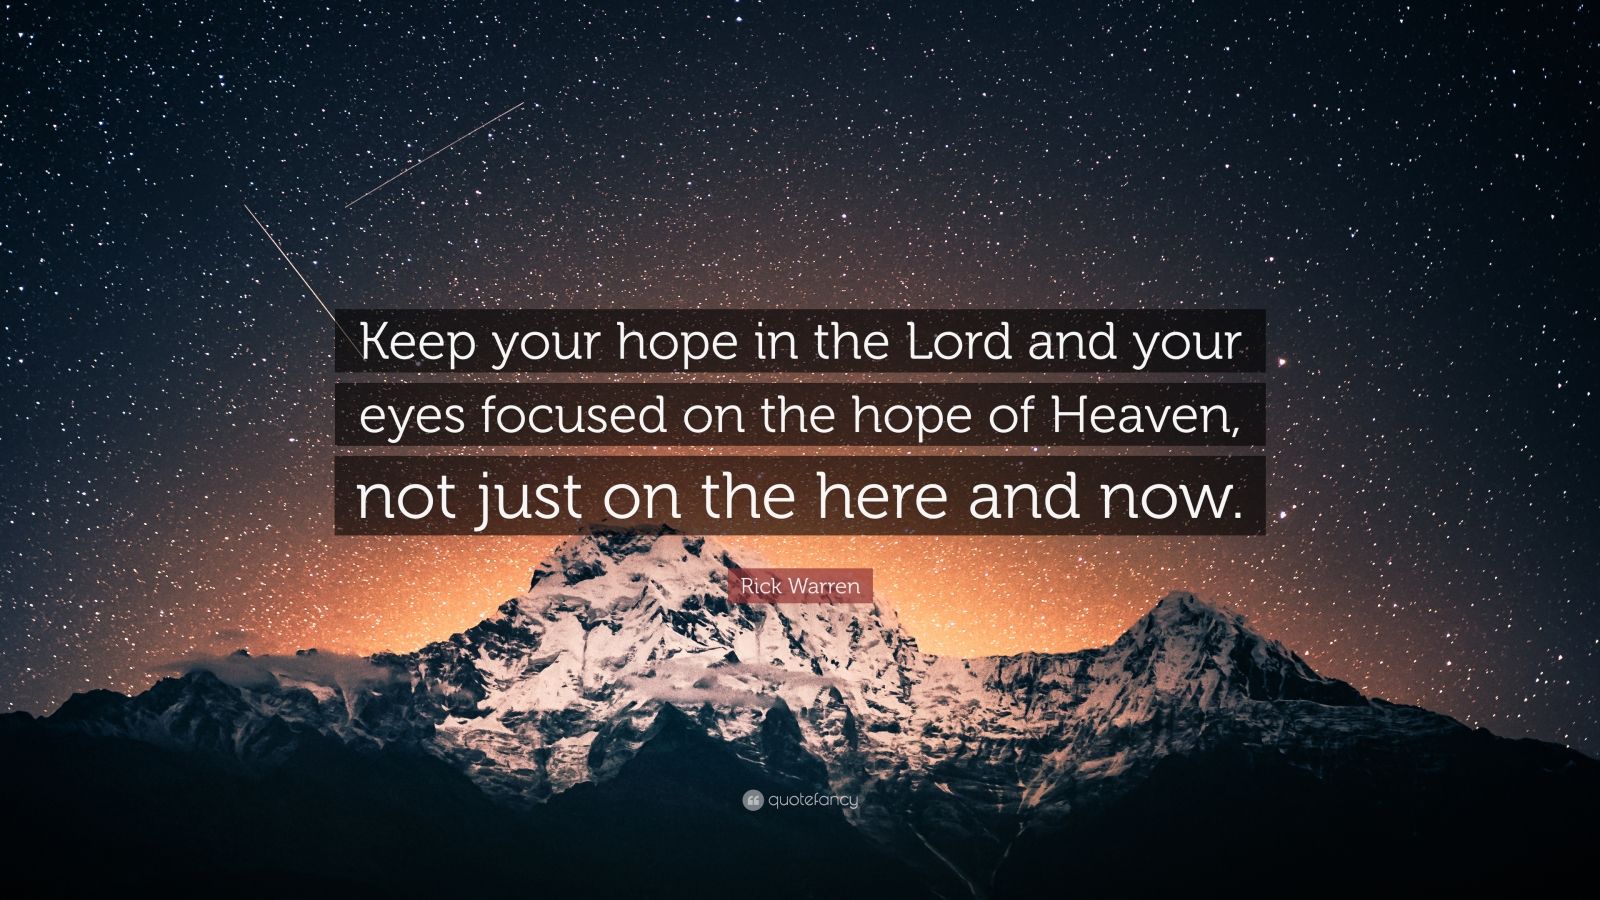 4855474 Rick Warren Quote Keep your hope in the Lord and your eyes focused